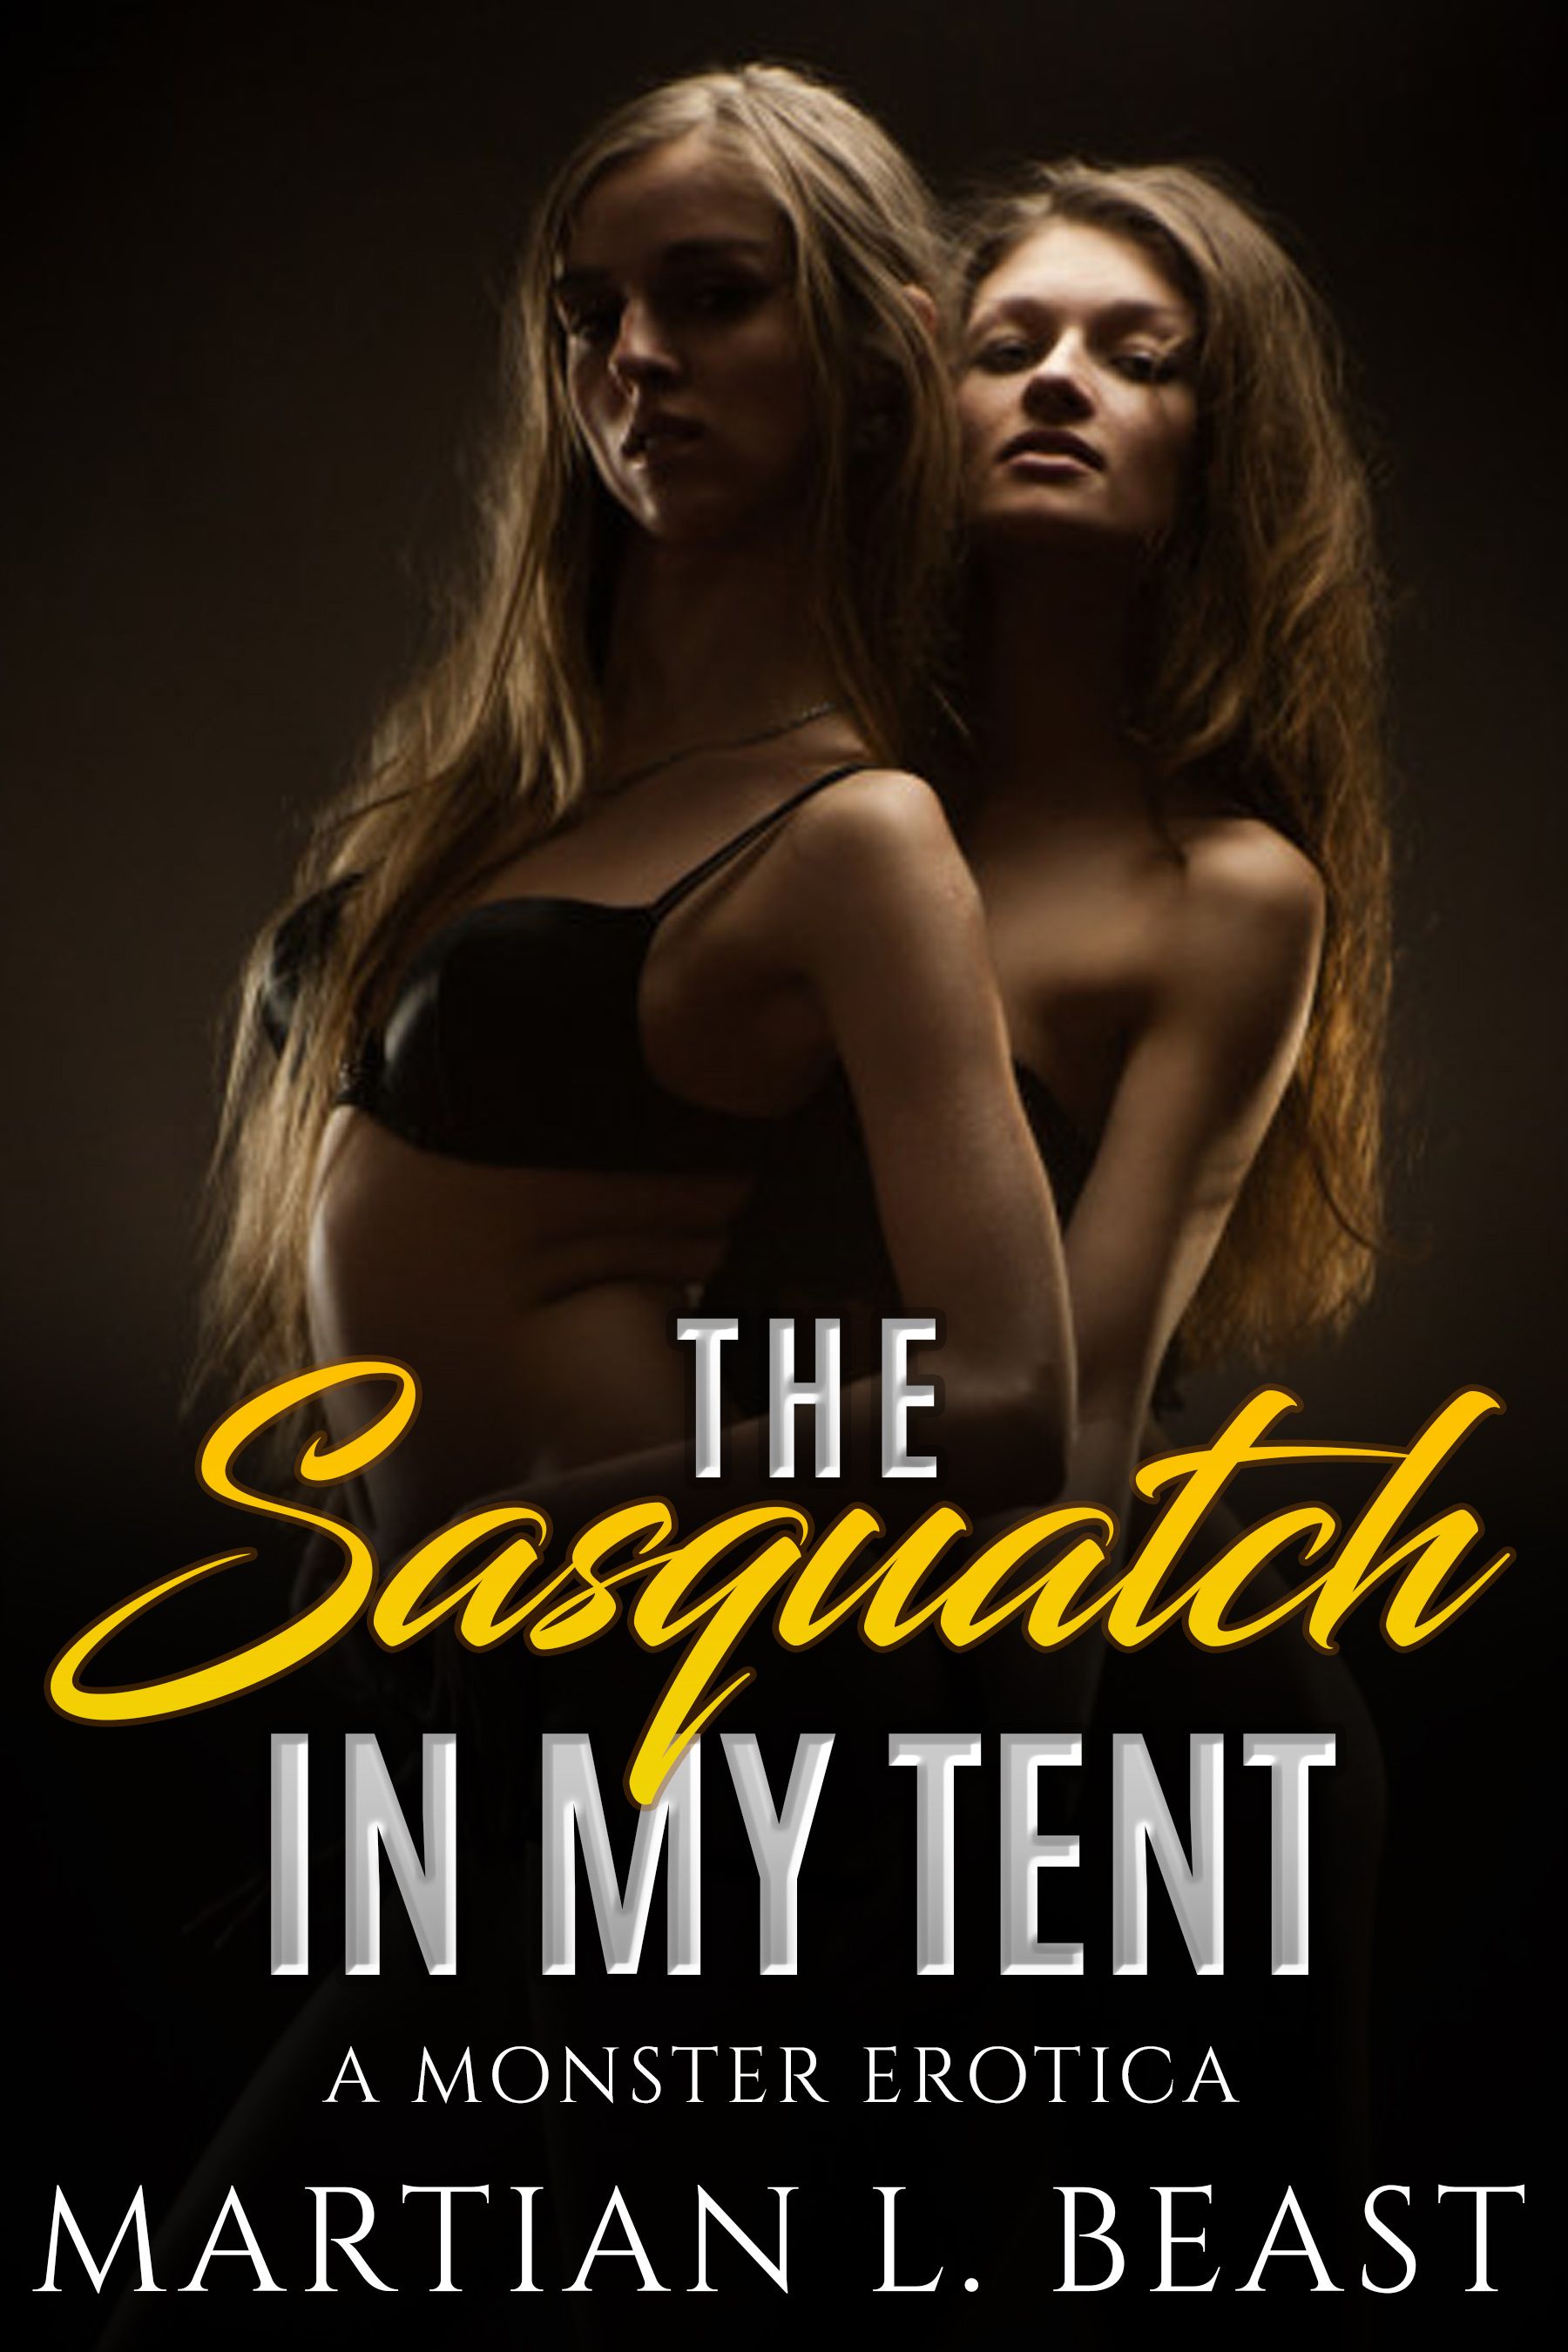 The Sasquatch in My Tent - A Monster Erotica's Book Image